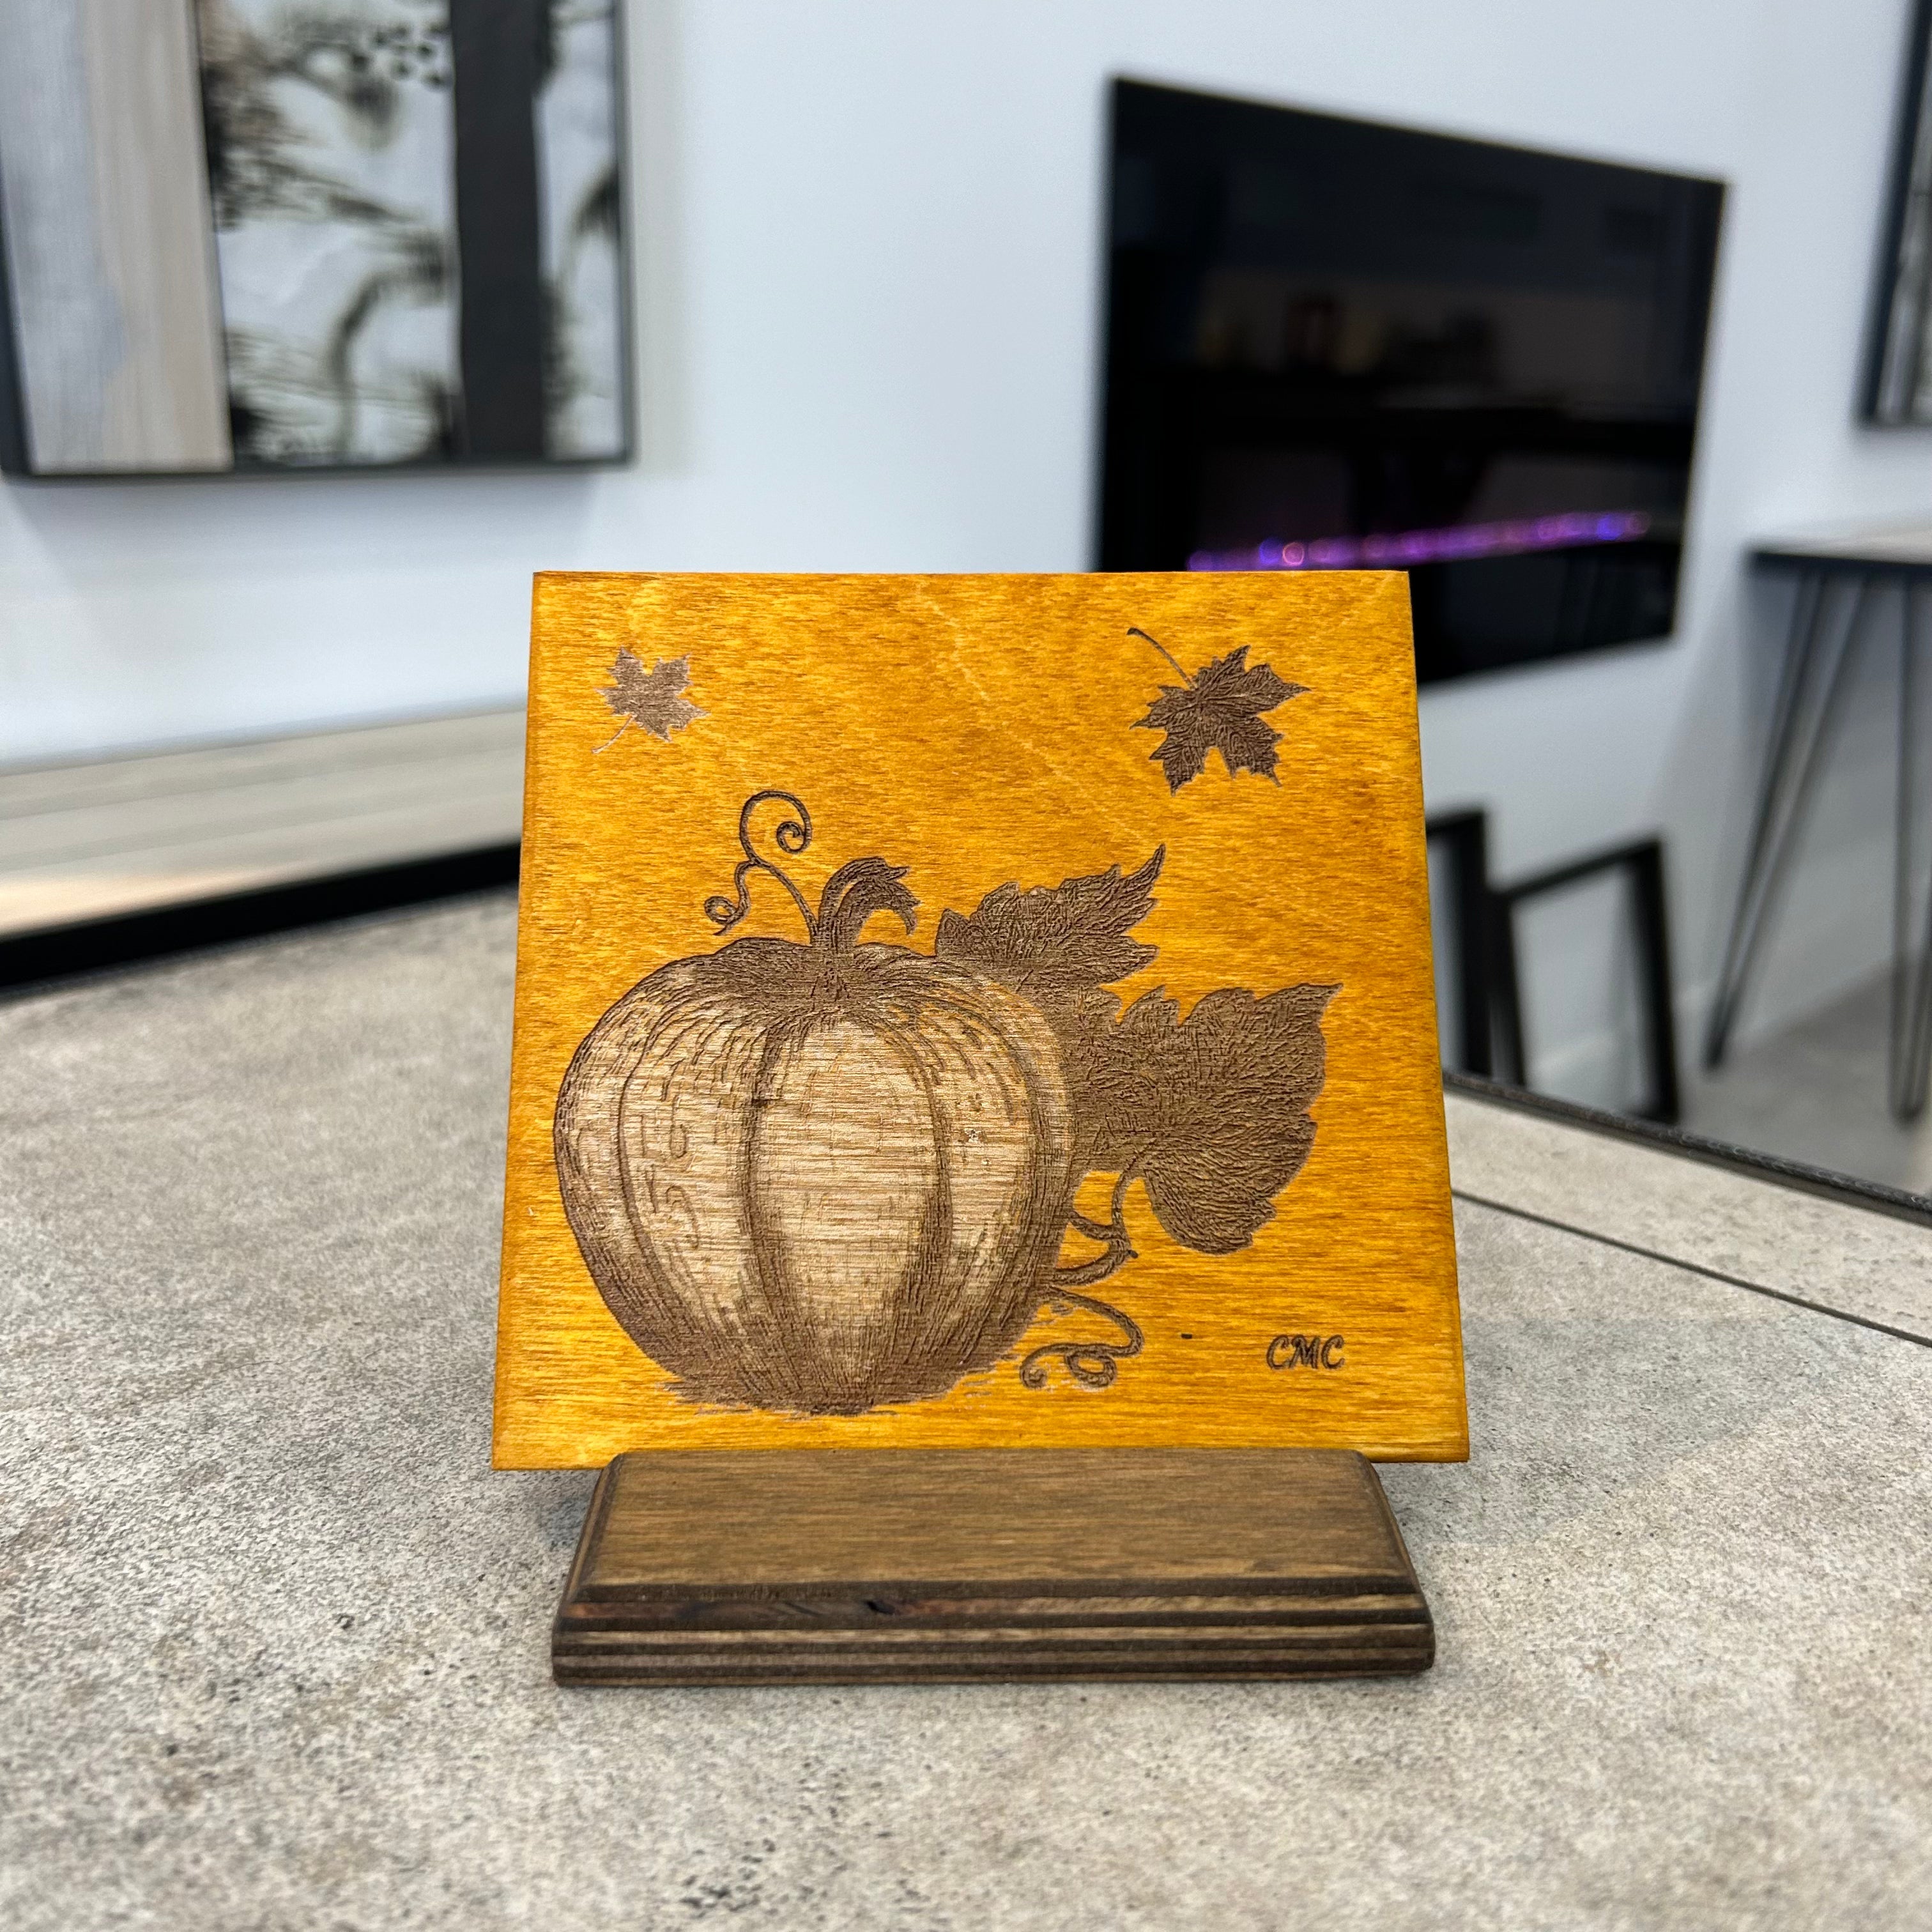 Laser engraved pumpkin image on a Baltic Birch amber stain tile. The tile is displayed on a Baltic Birch stand